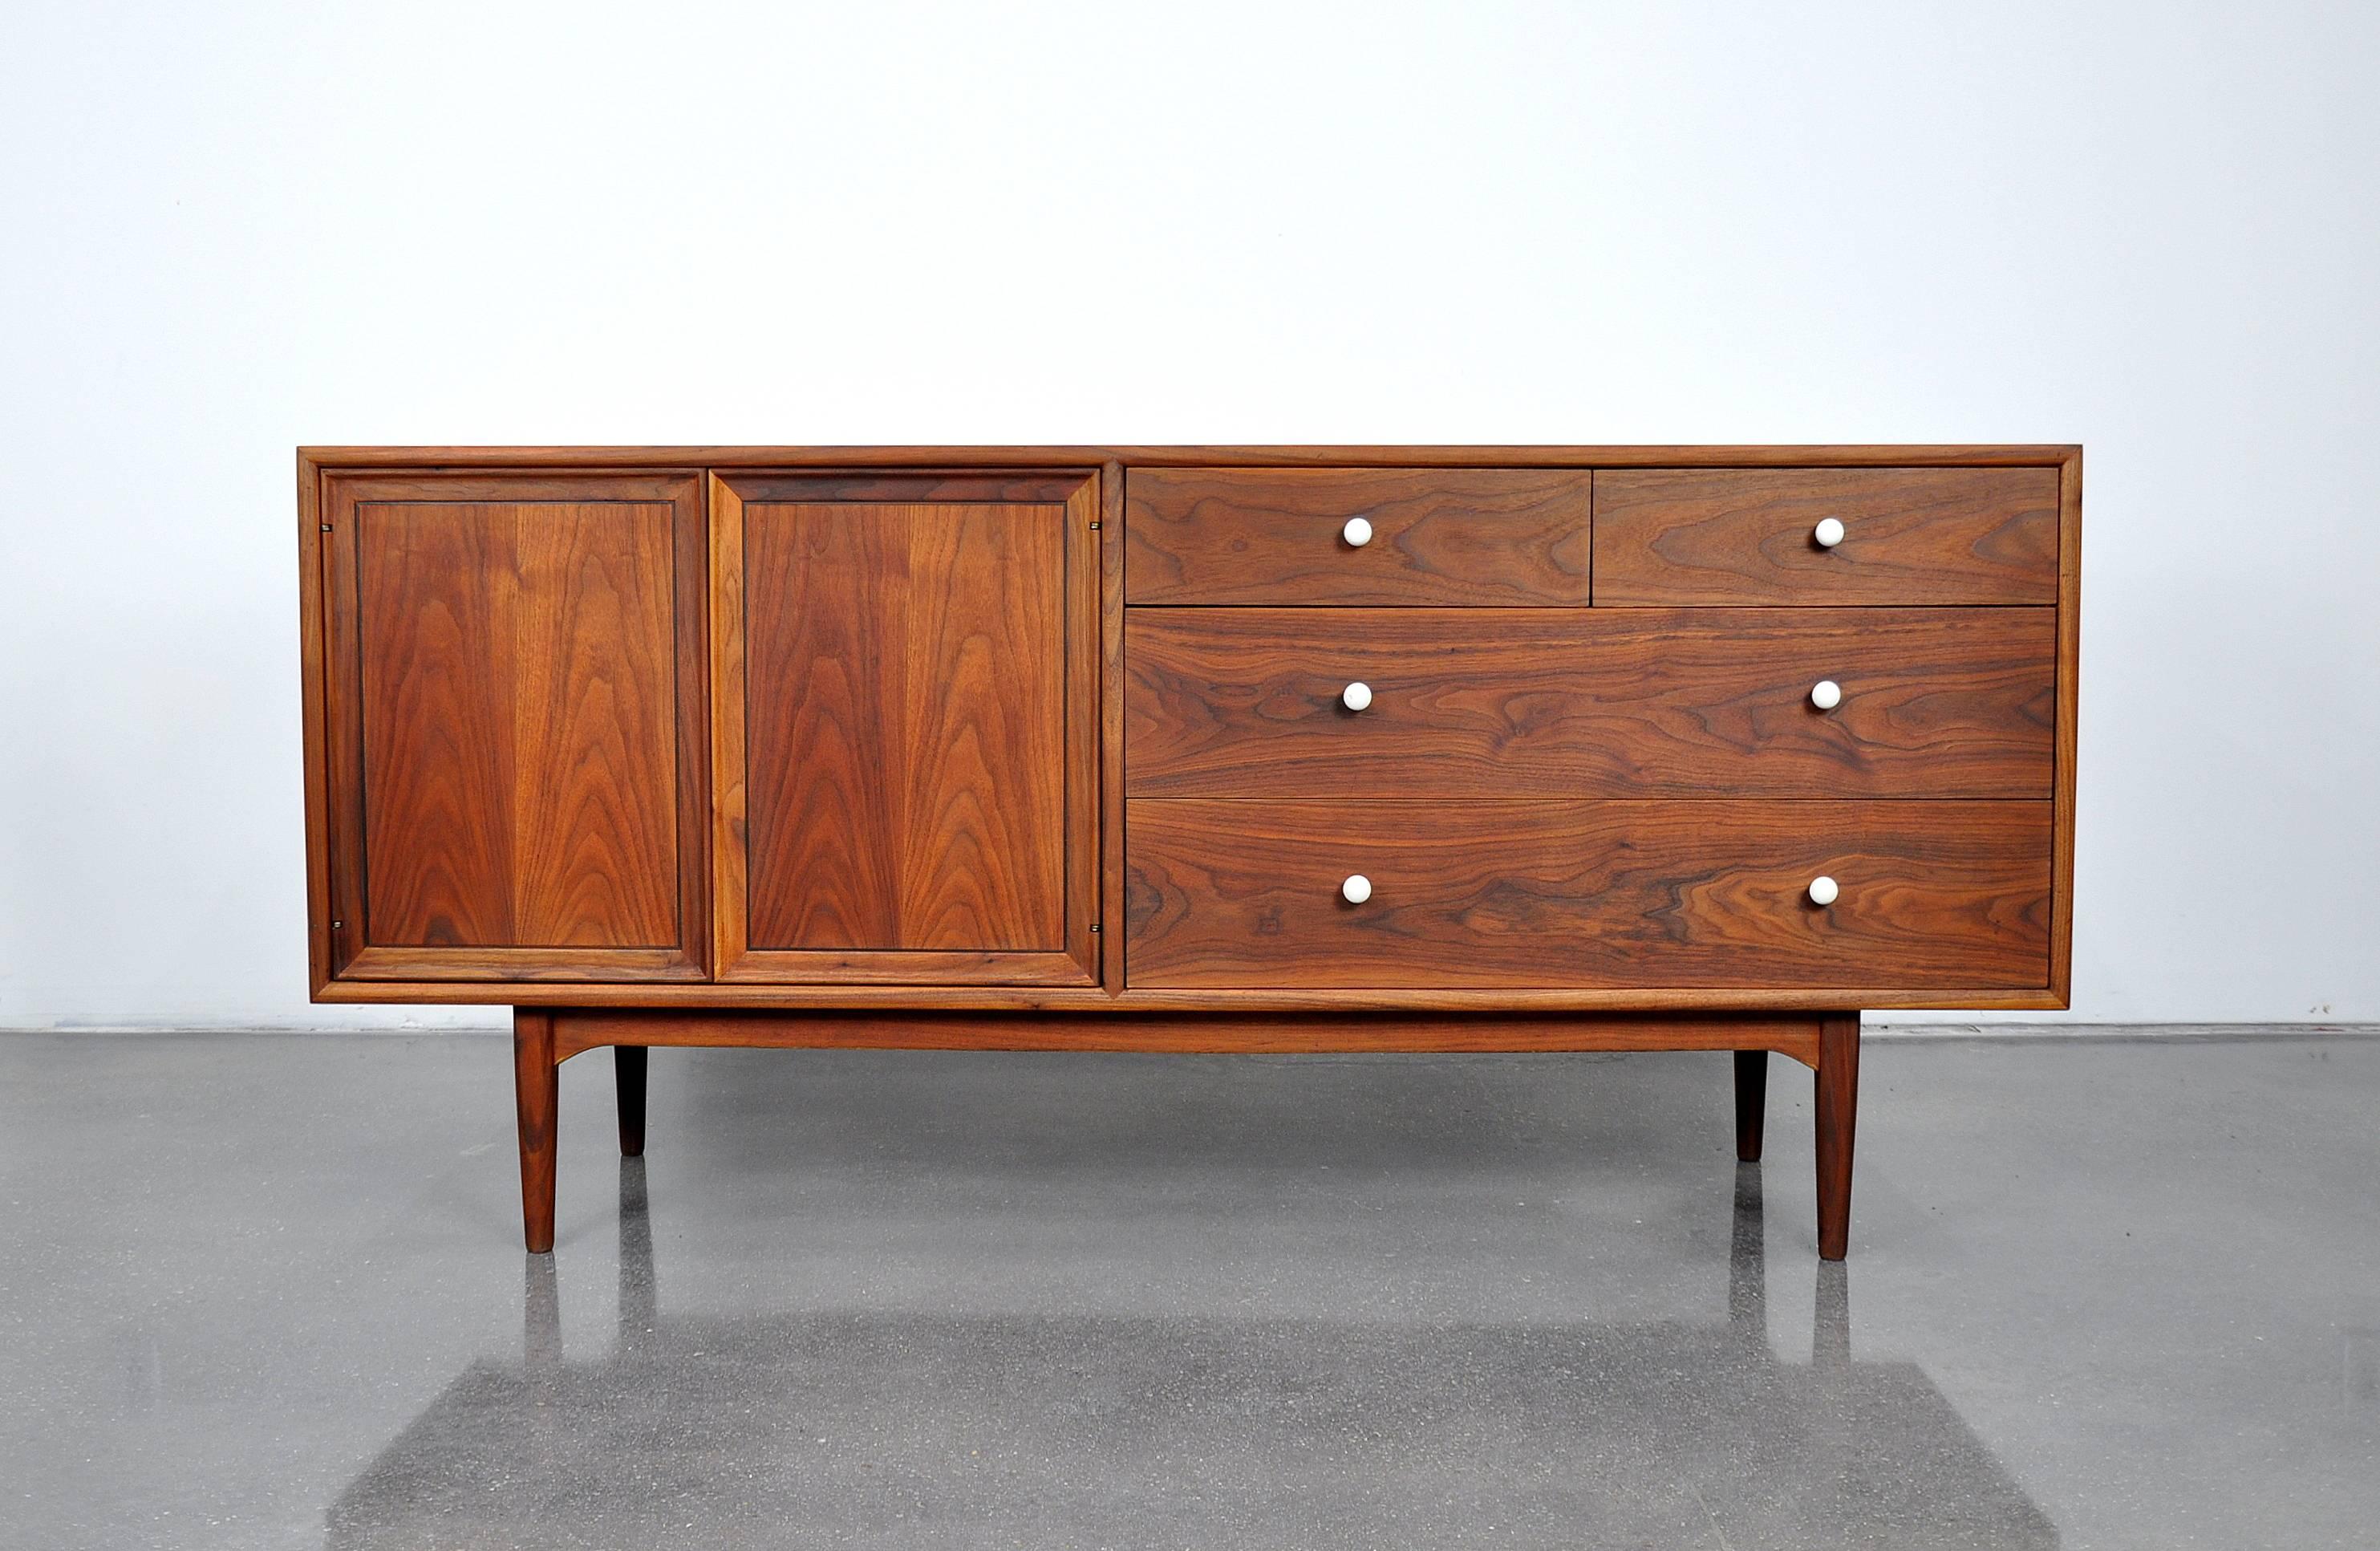 A wonderful Mid-Century Modern bedroom set including a vintage triple dresser, and a pair of nightstands designed in the 1950s by Kipp Stewart and Steward MacDougall for the Drexel Declaration line. The beautifully grained walnut features striking